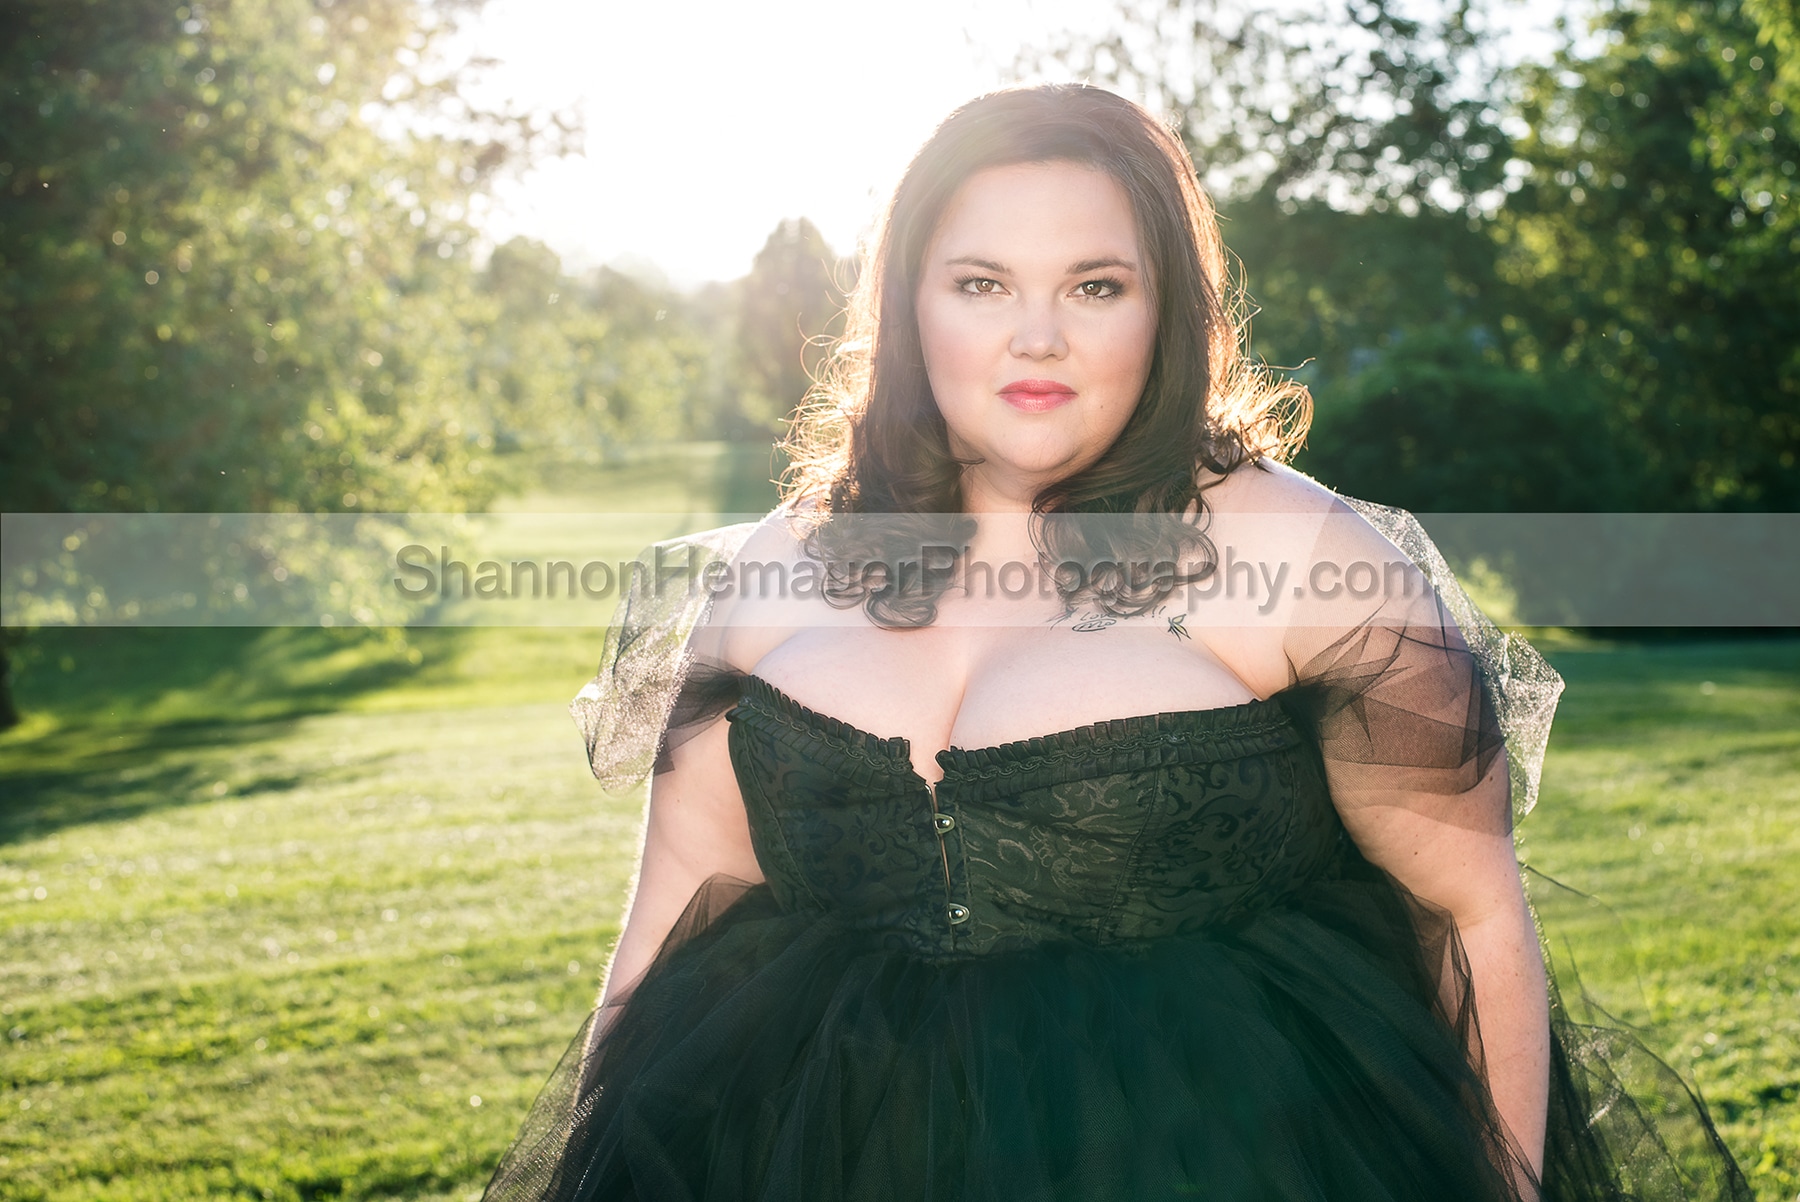 Contemporary glamour session wearing black corset. 